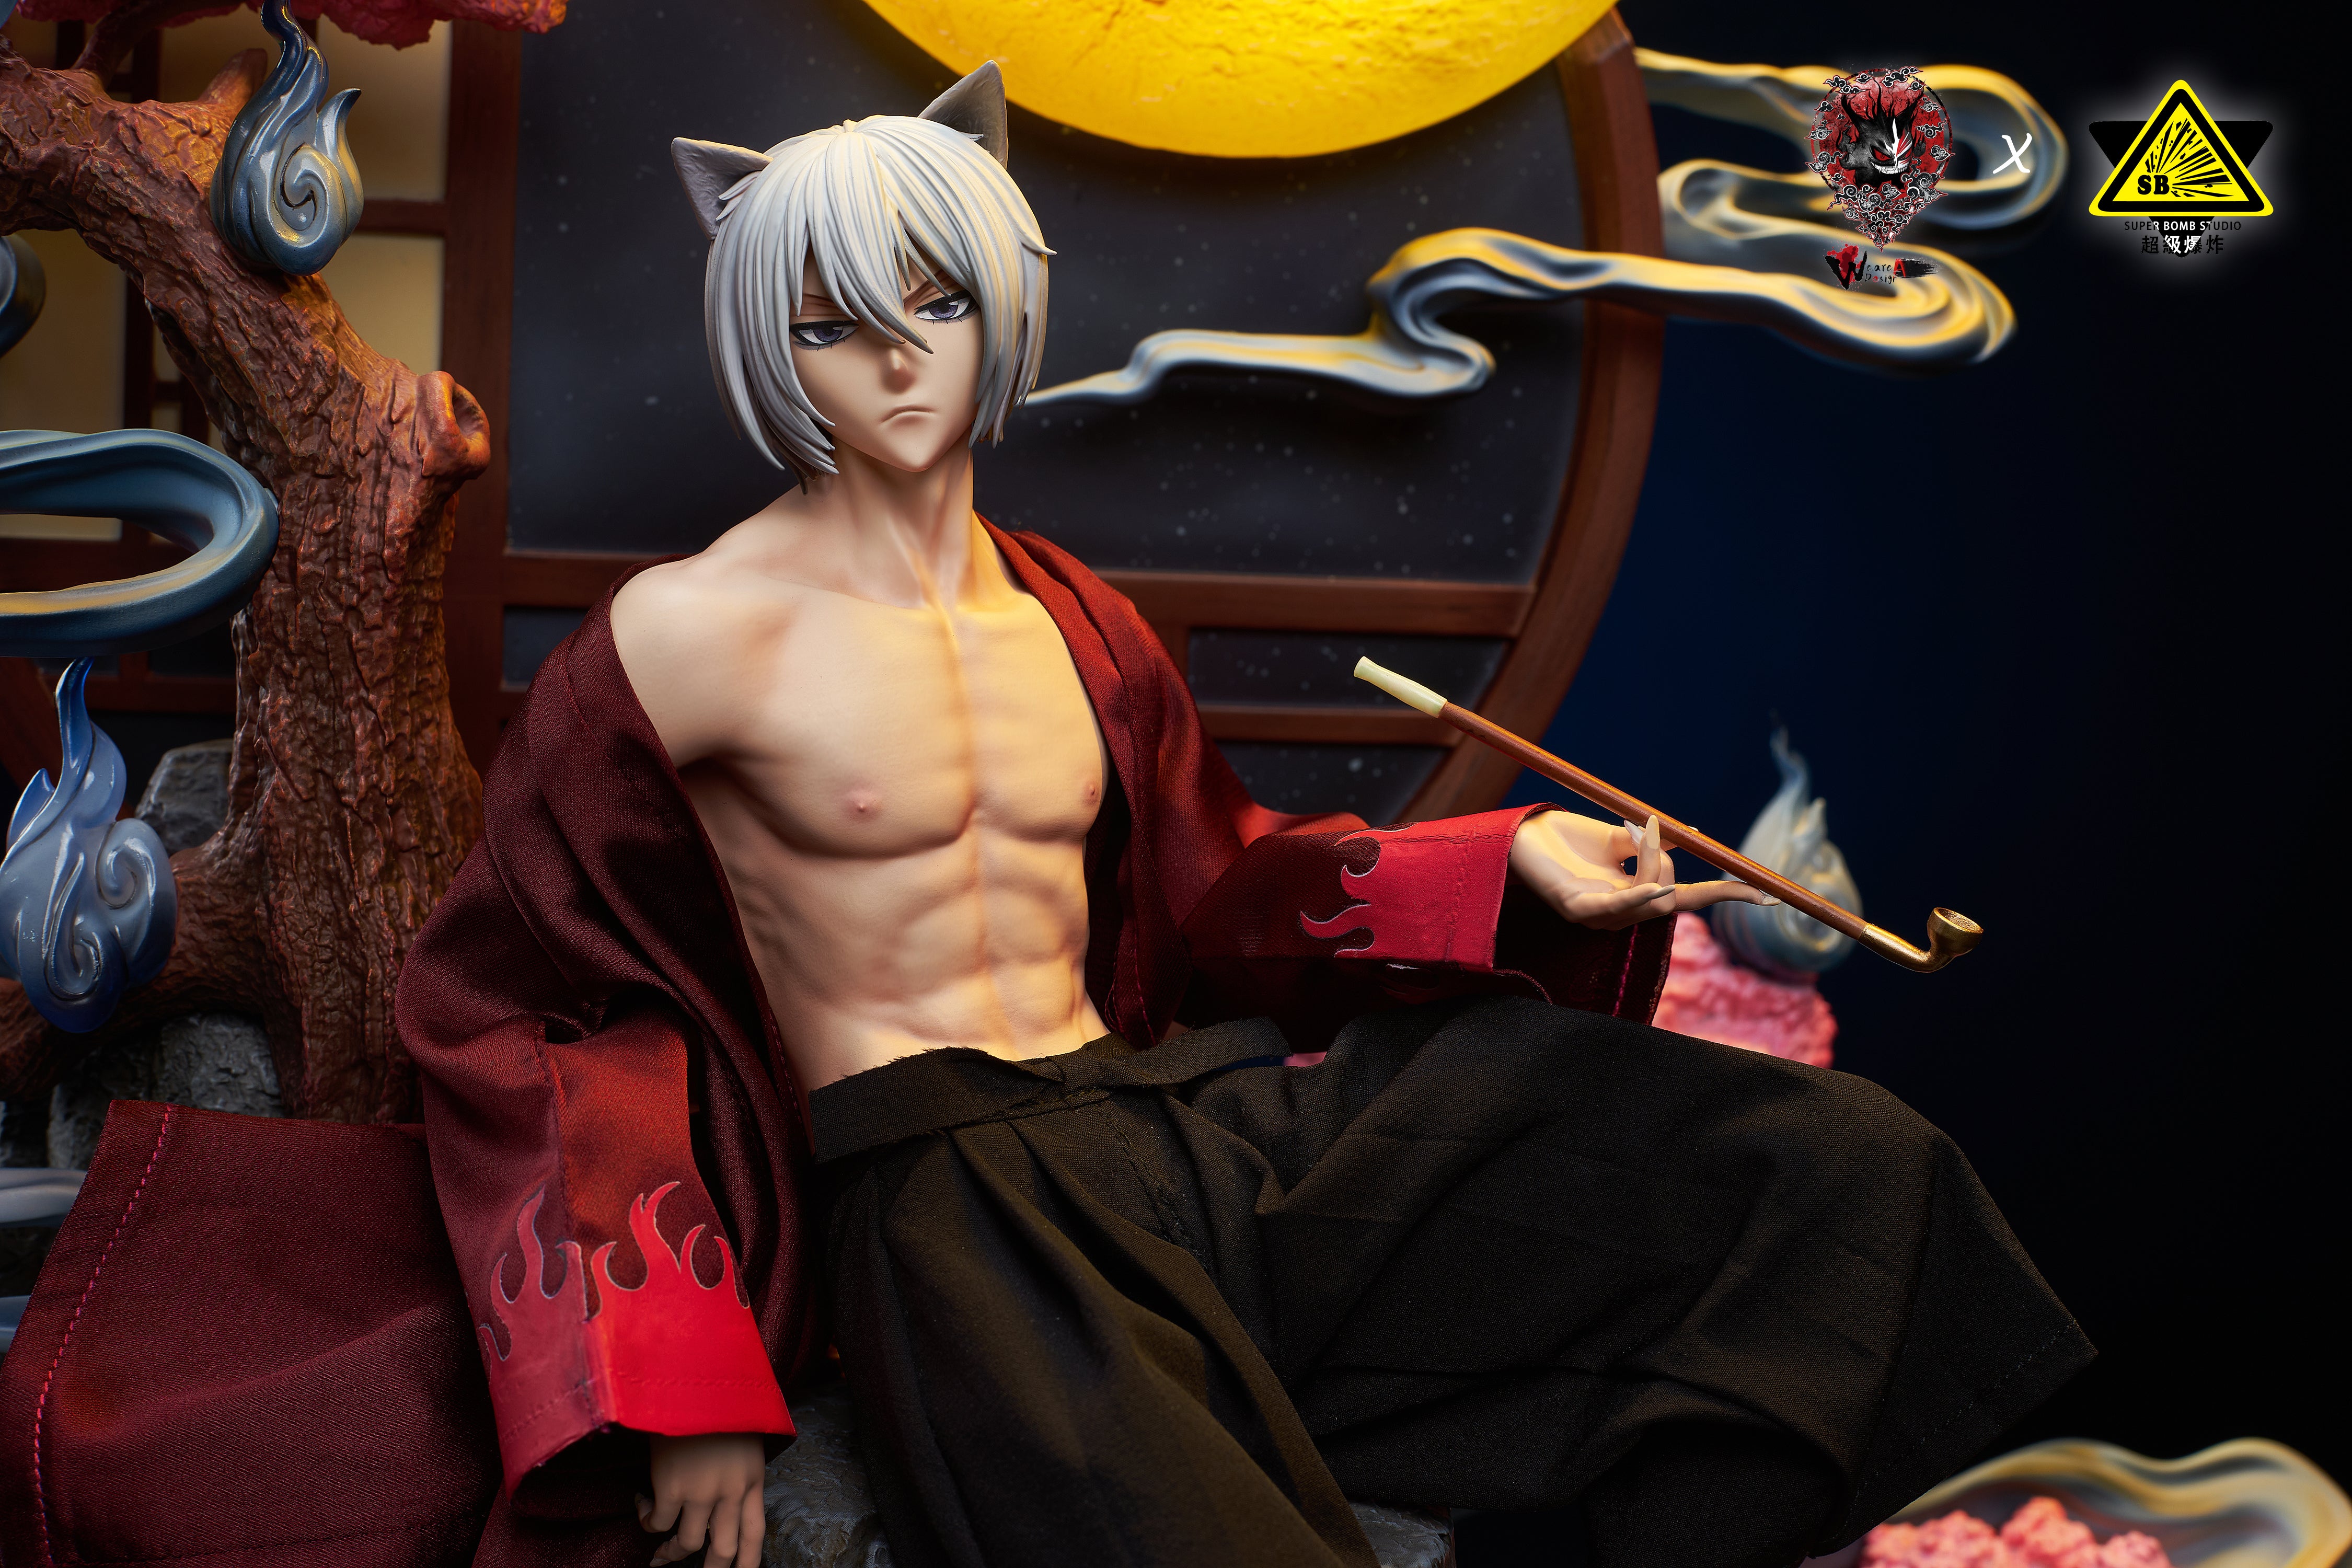 1/6 Scale Tomoe with LED - Kamisama Kiss Resin Statue - Weare A Design  Studio [Pre-Order]